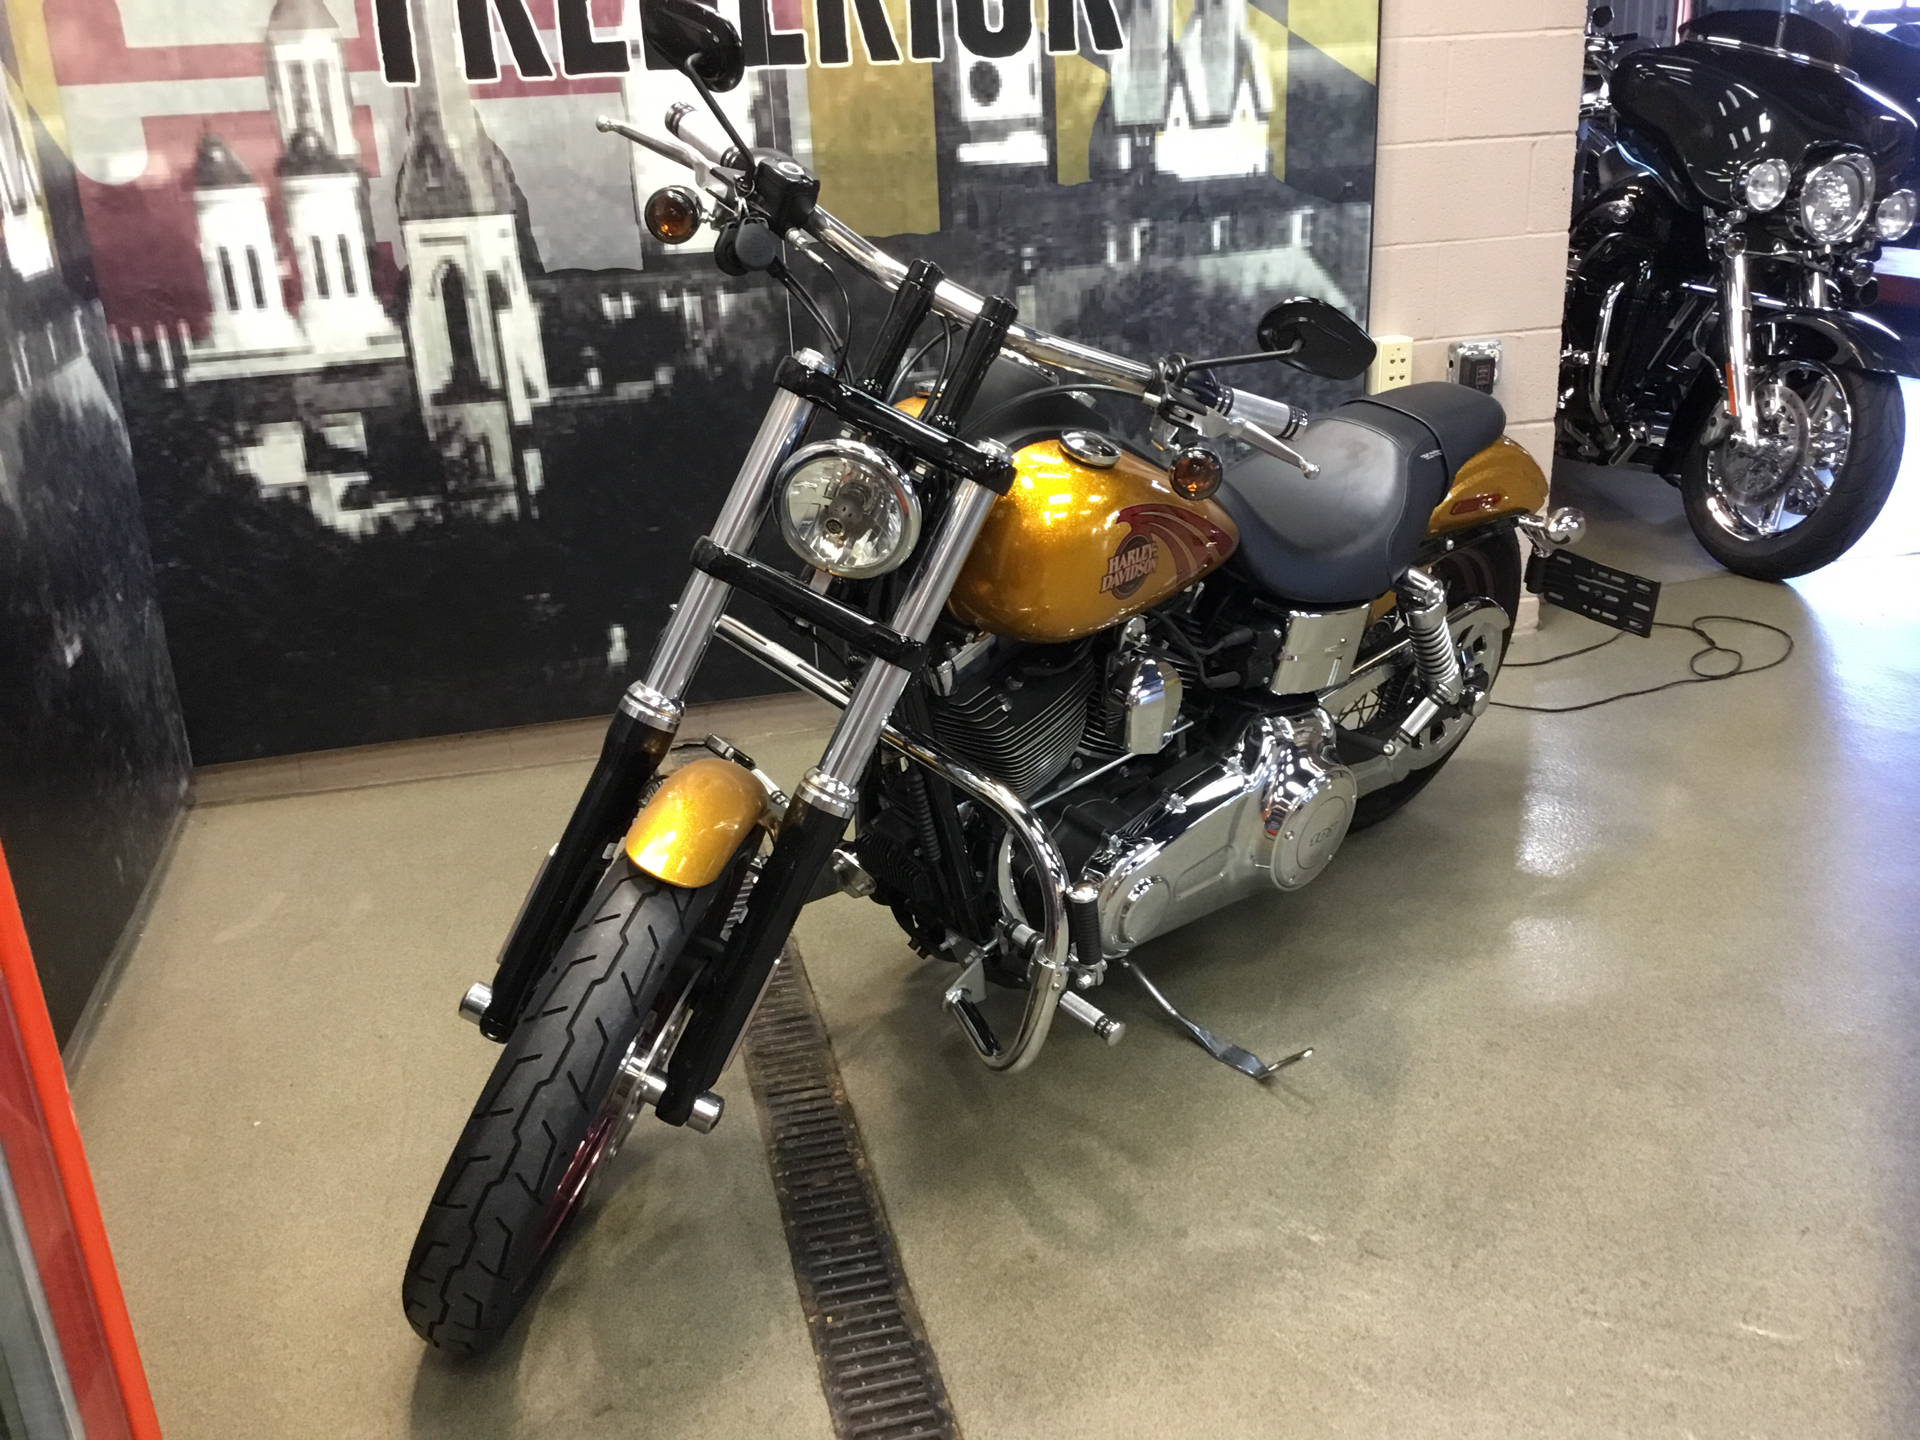 Used 2016 Harley Davidson Street Bob Motorcycles In Frederick Md Hard Candy Black Gold Flake 308207